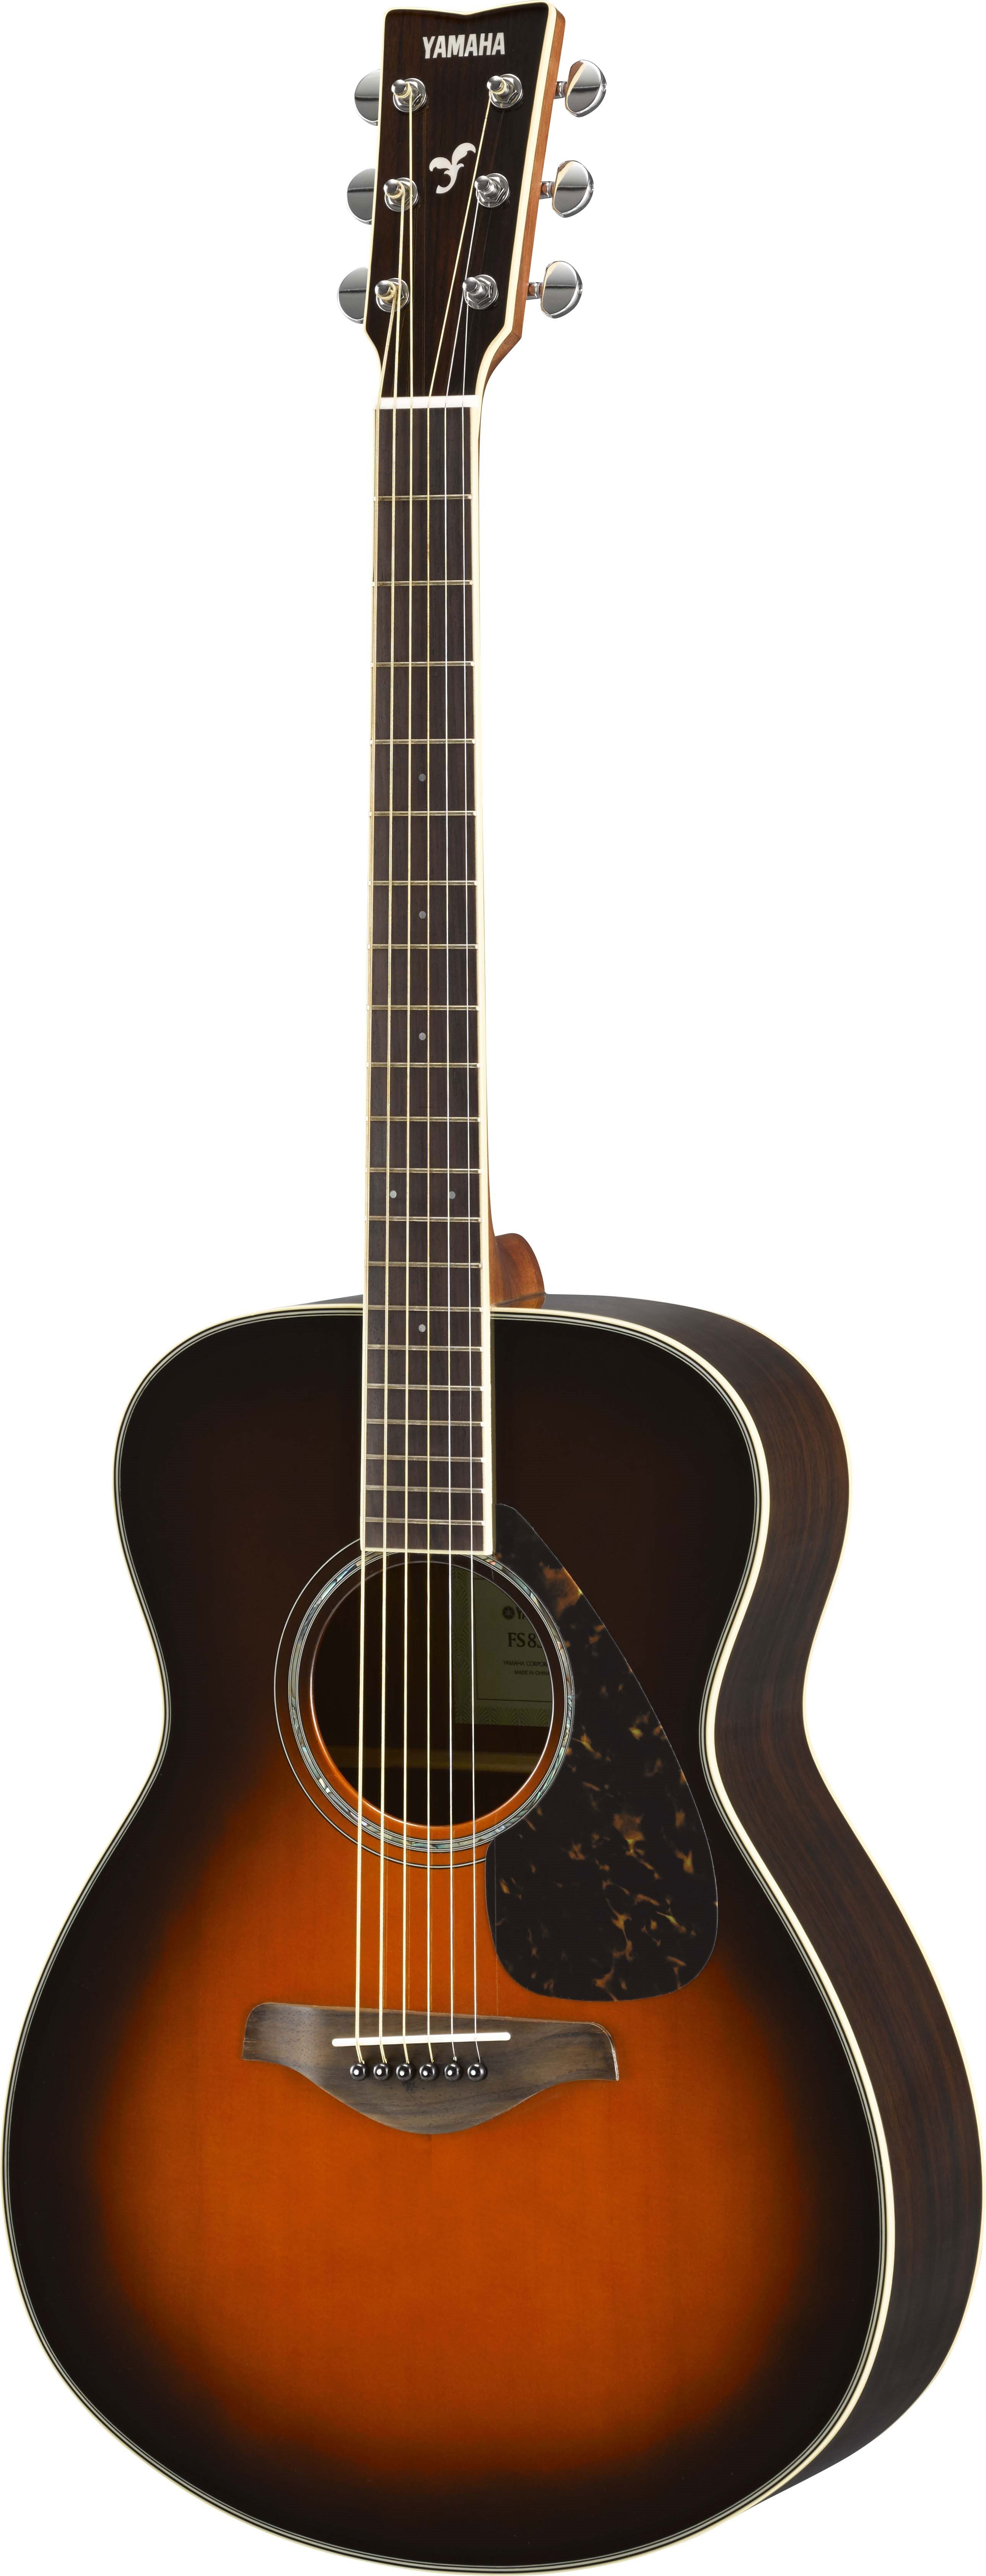 Yamaha FS830 Concert Small Body Acoustic Guitar with Rosewood Back + Sides - Natural for sale